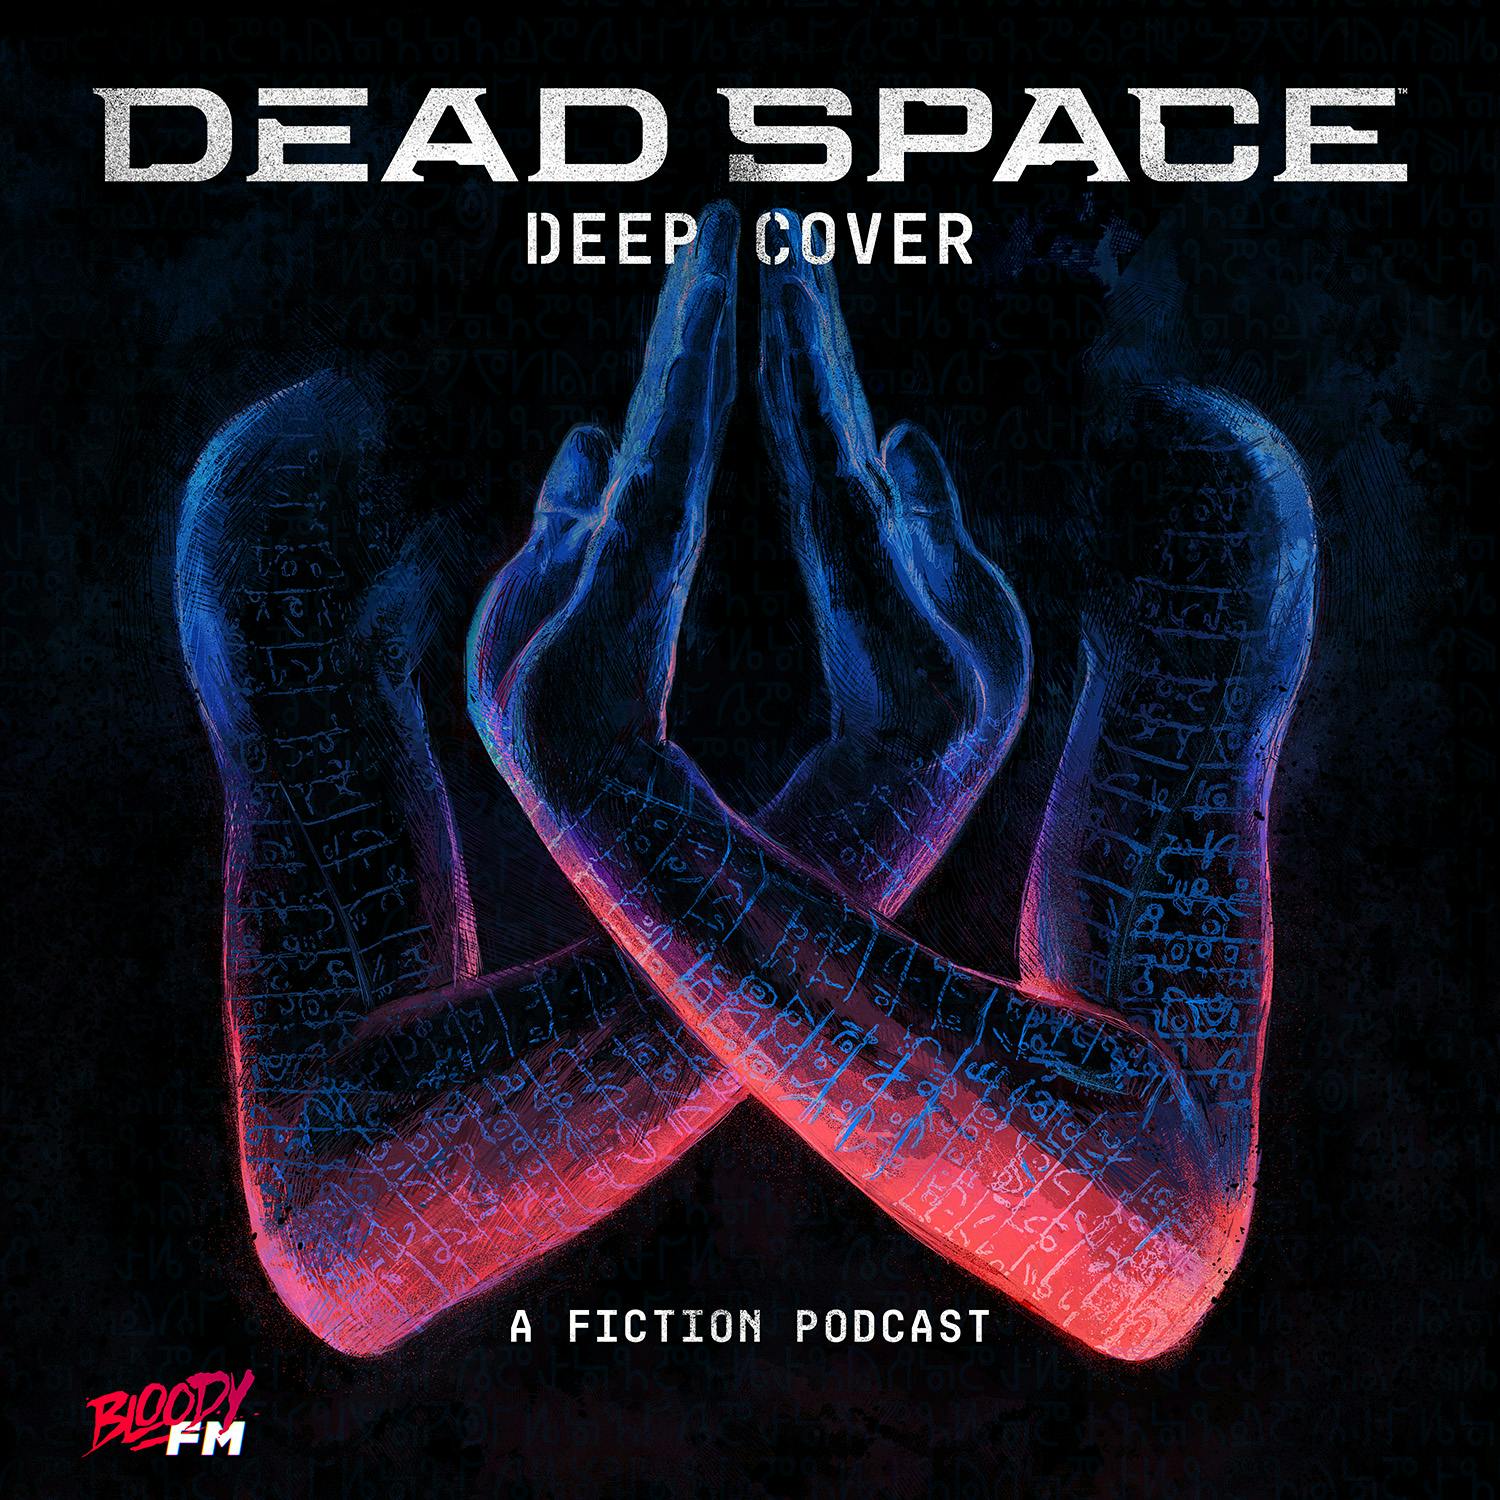 Presenting Dead Space: Deep Cover